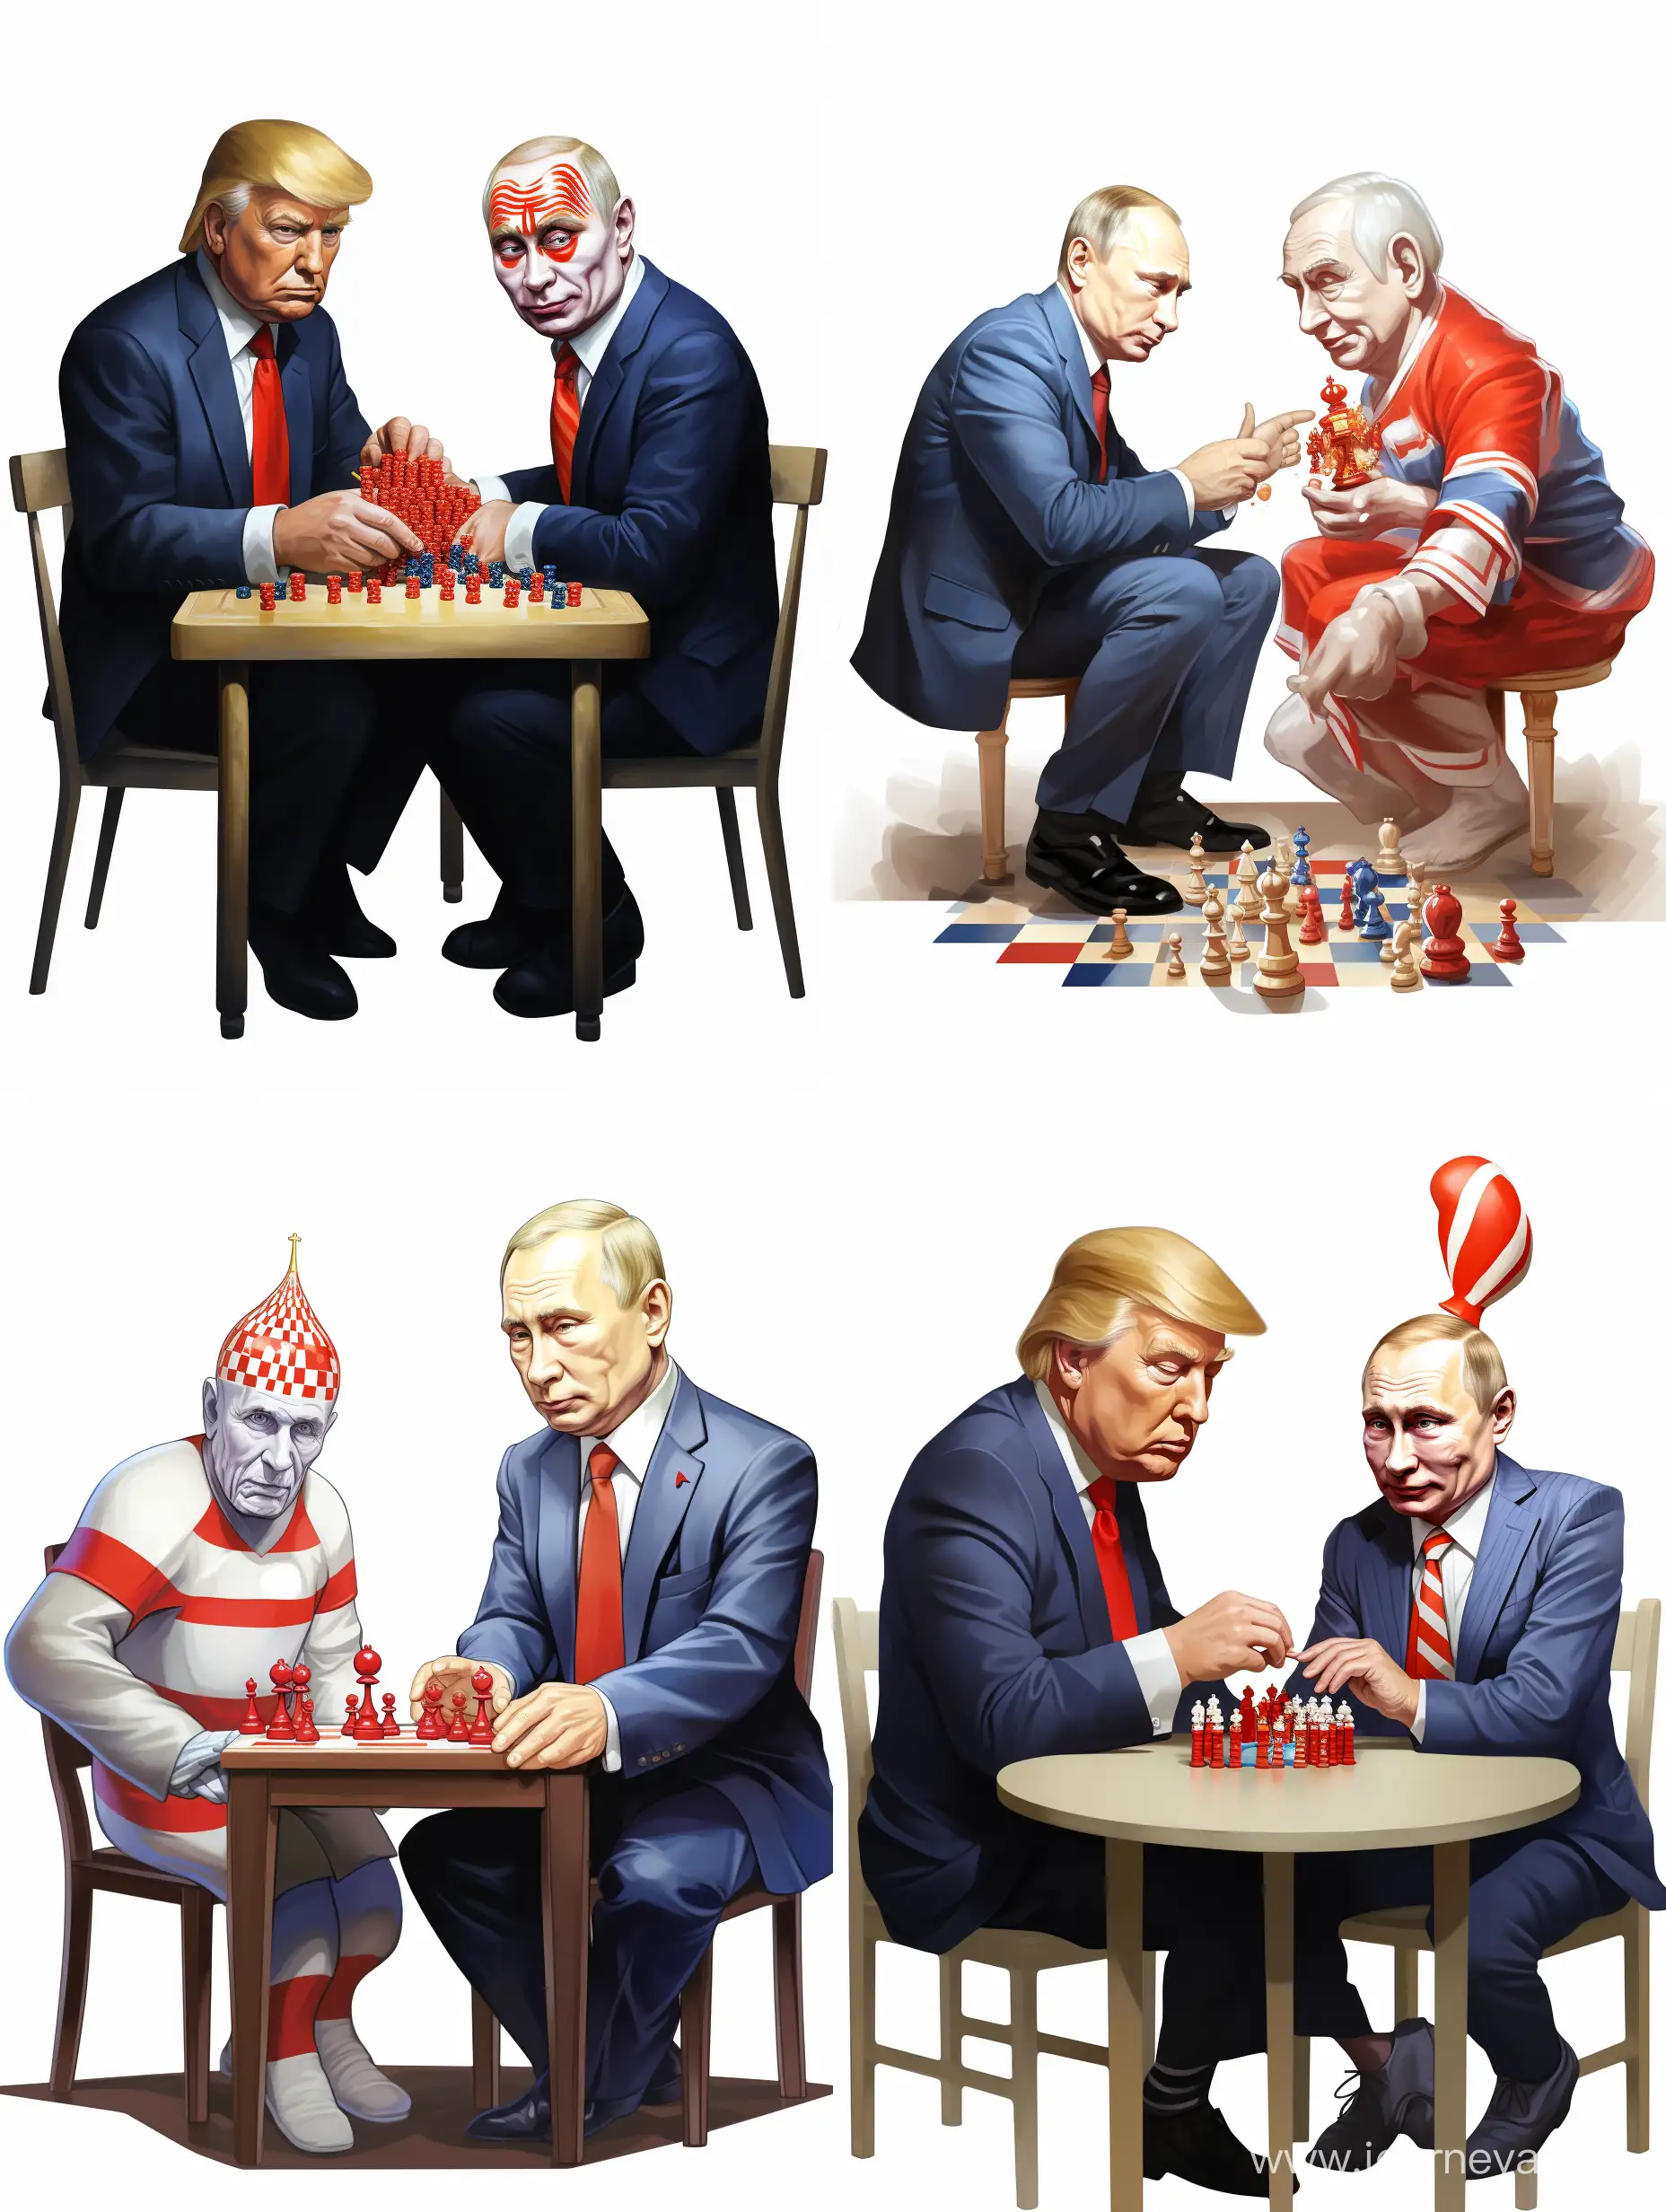 Global-Chess-Diplomacy-Putin-Faces-off-with-American-Clown-in-Cartoon-Illustration